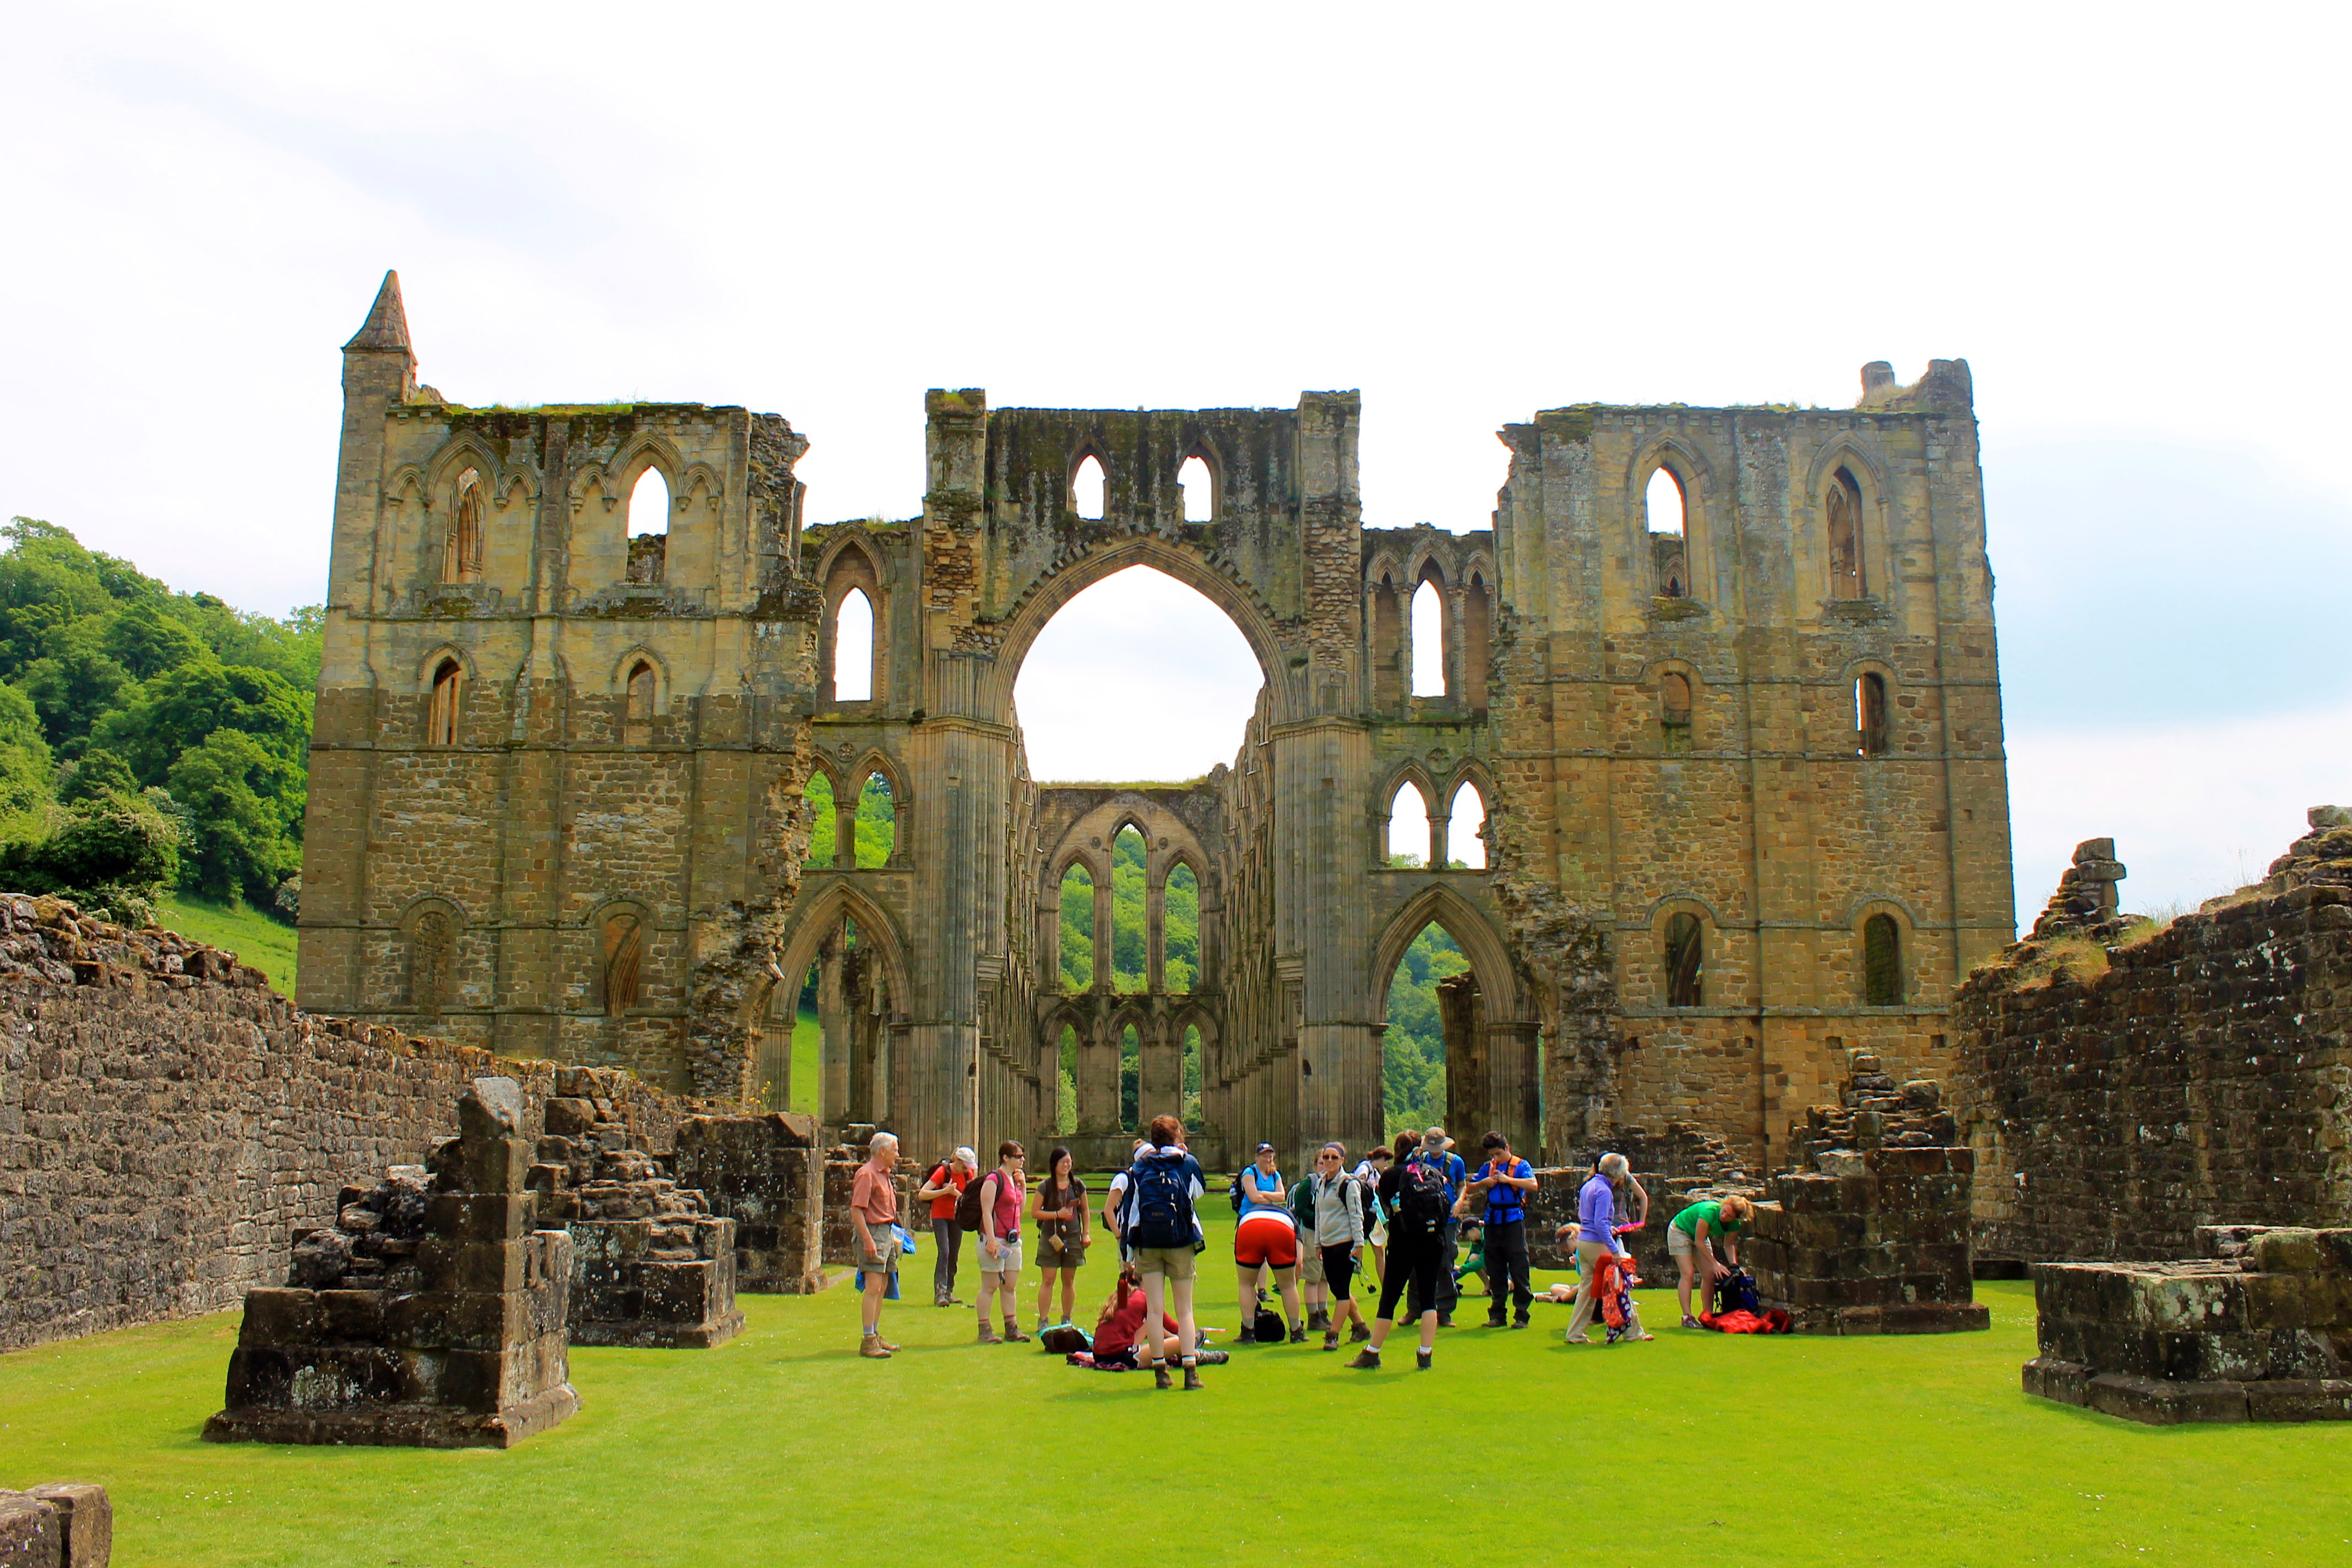 Washington College students explore ancient ruins in England as a part of the Kiplin Hall Program, "Hiking the Liberal Arts."